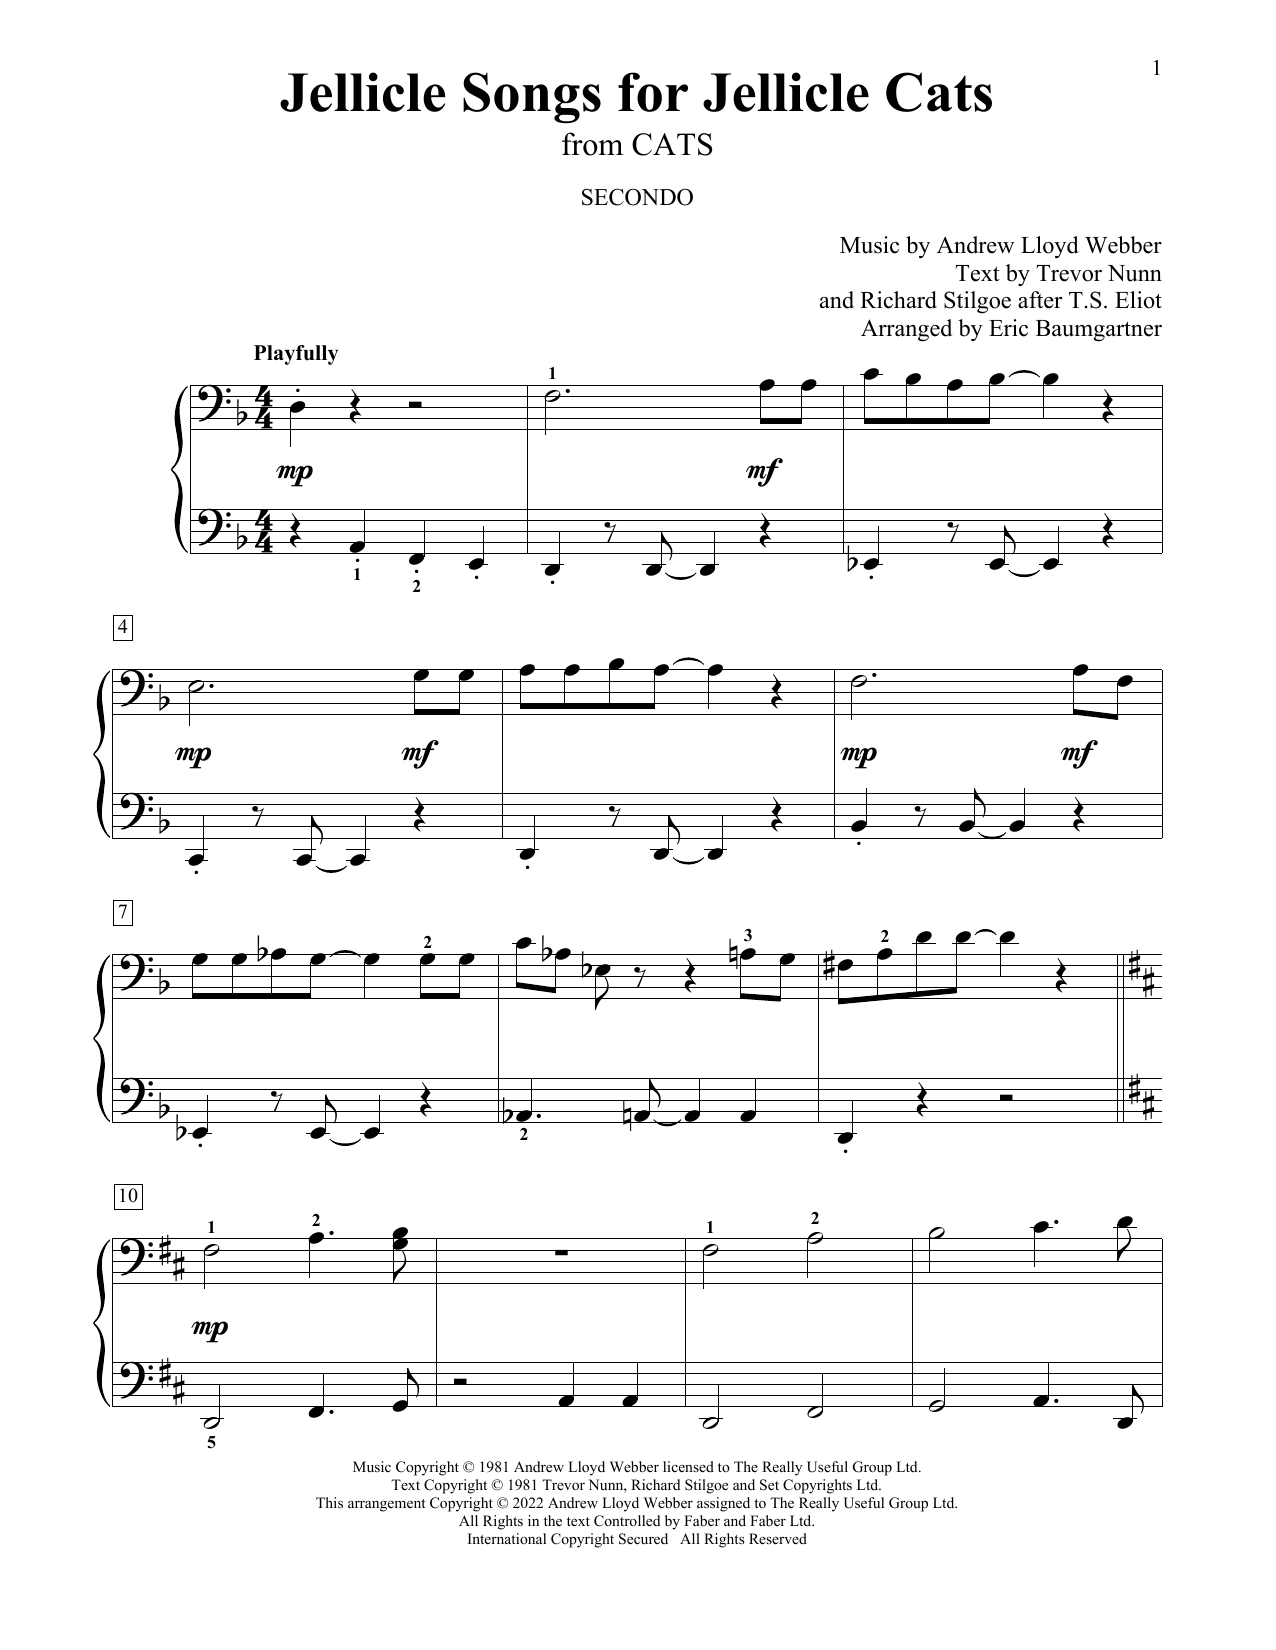 Andrew Lloyd Webber Jellicle Songs For Jellicle Cats (from Cats) (arr. Eric Baumgartner) sheet music notes and chords. Download Printable PDF.